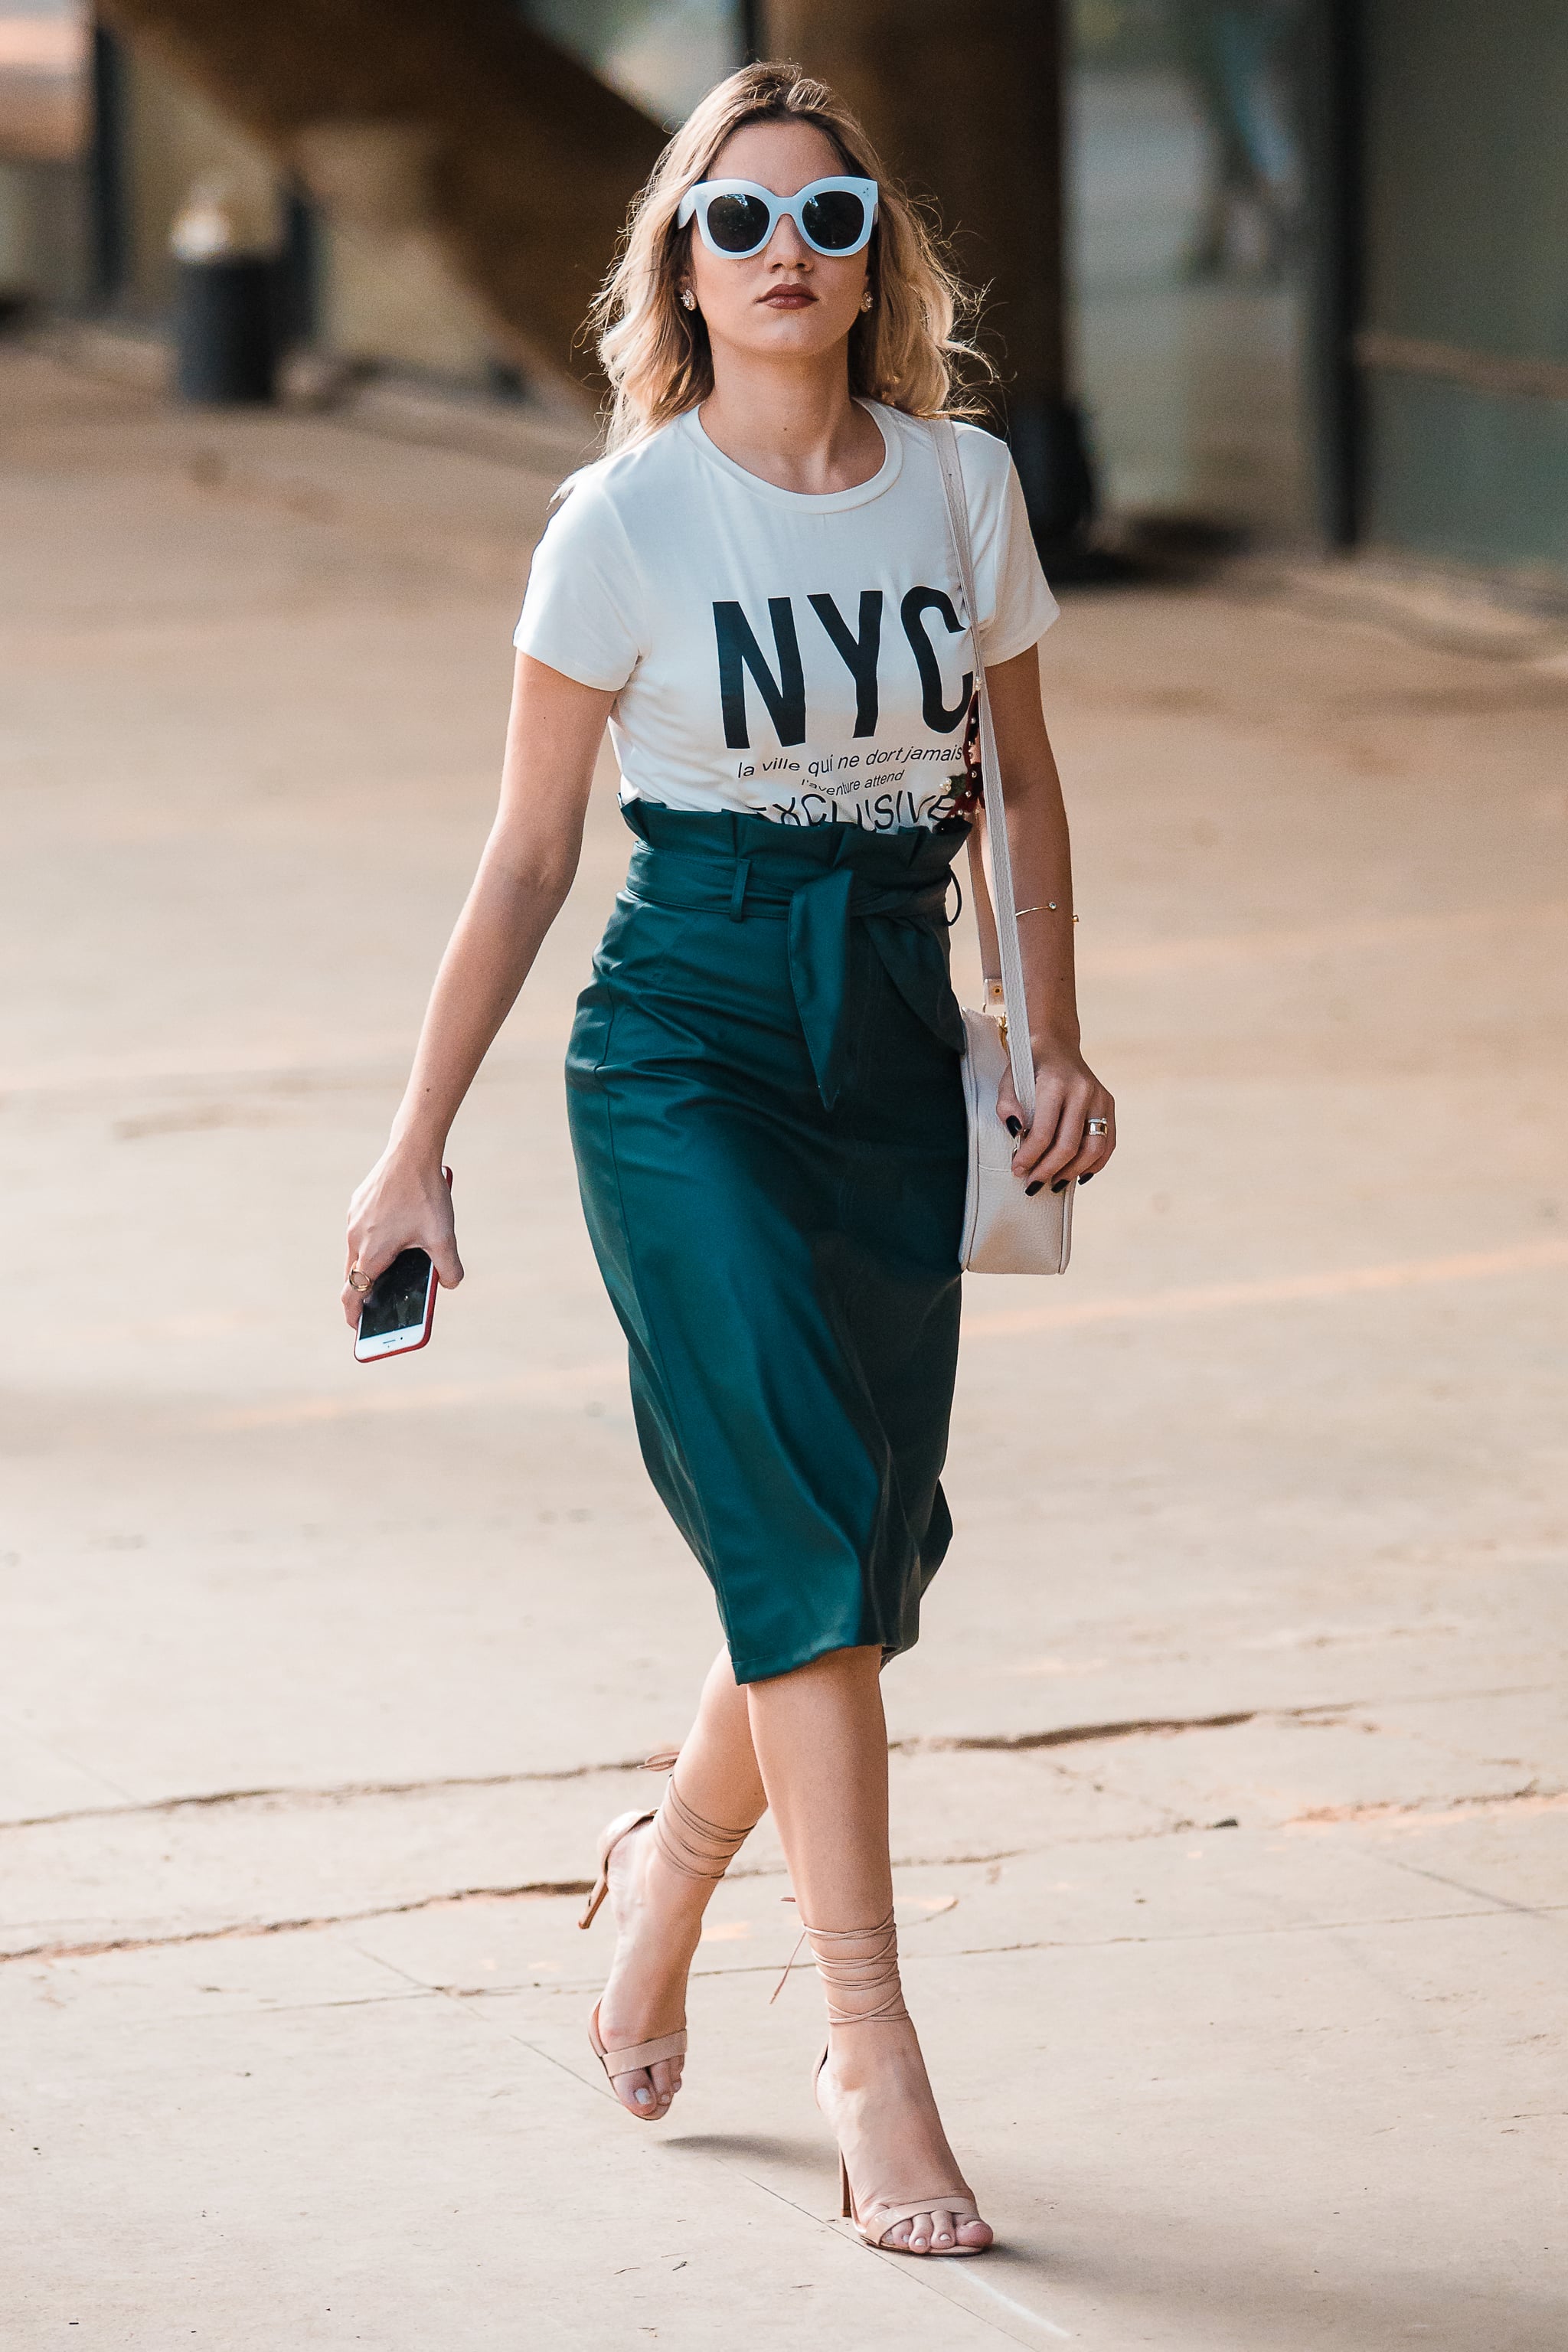 Dress Up Your Favourite Tee With a High-Waisted Skirt, Going Out? These  Outfit Ideas Will Help You Look Sexy and Stylish All at Once